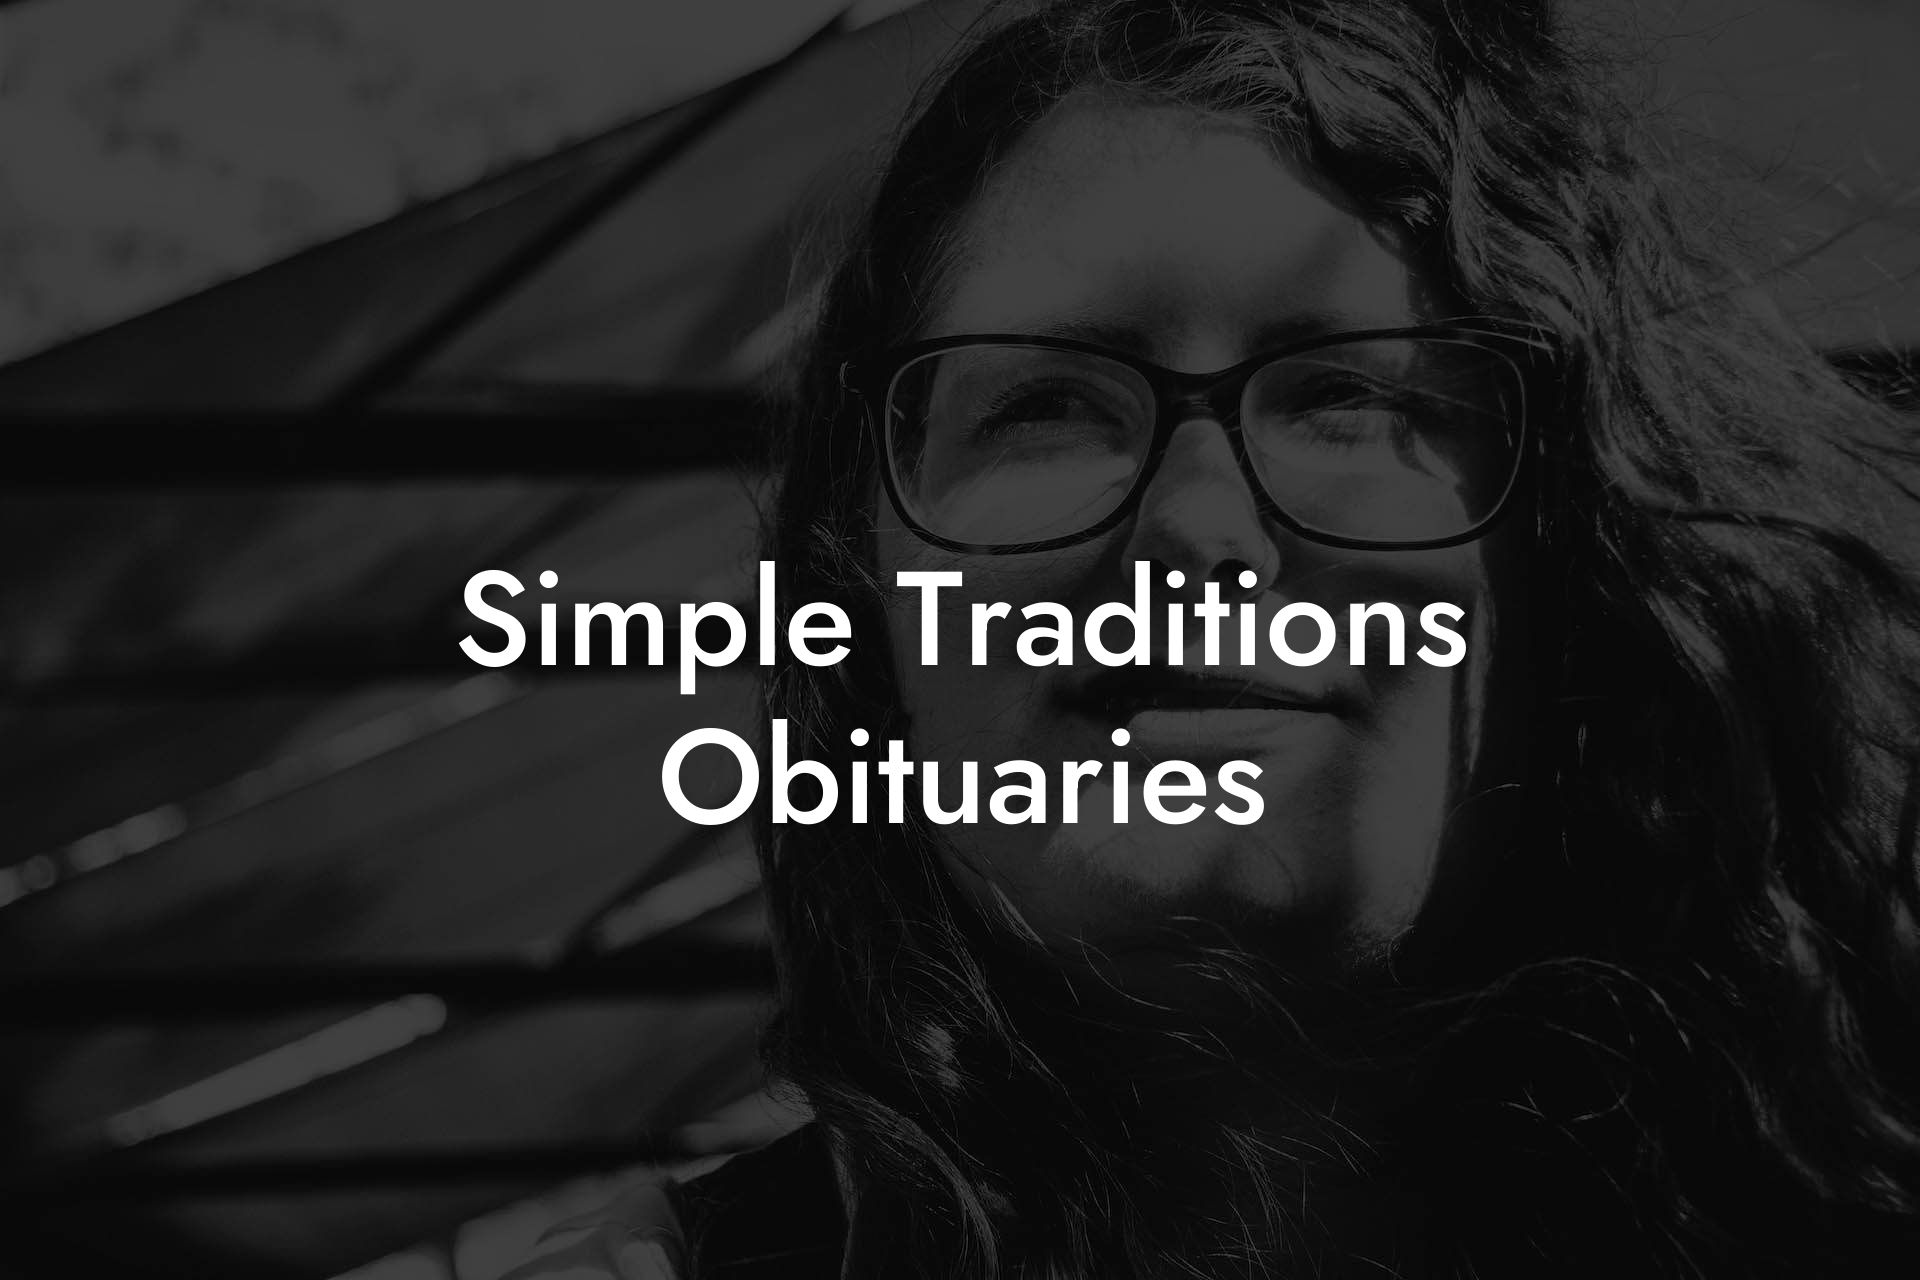 Simple Traditions Obituaries